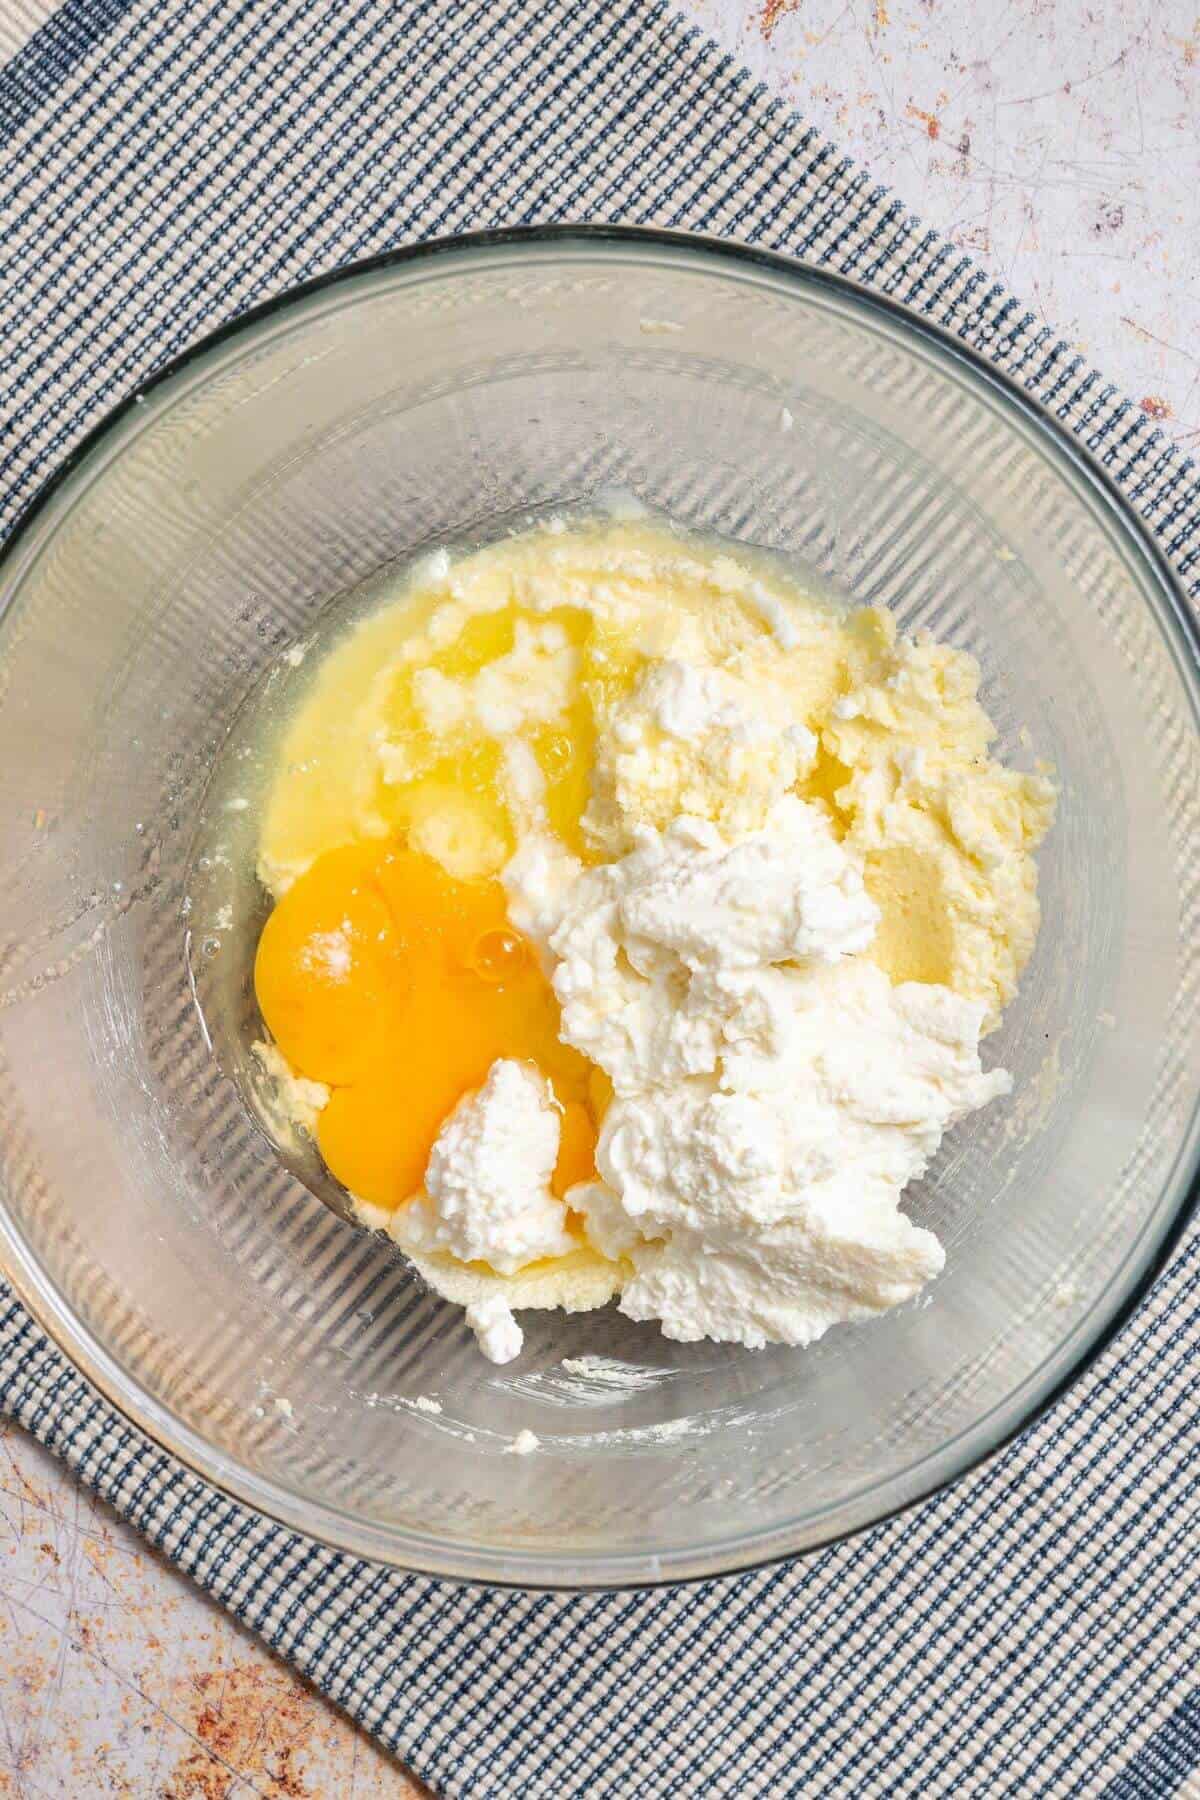 Ricotta cheese, egg, and lemon juice added to bowl.